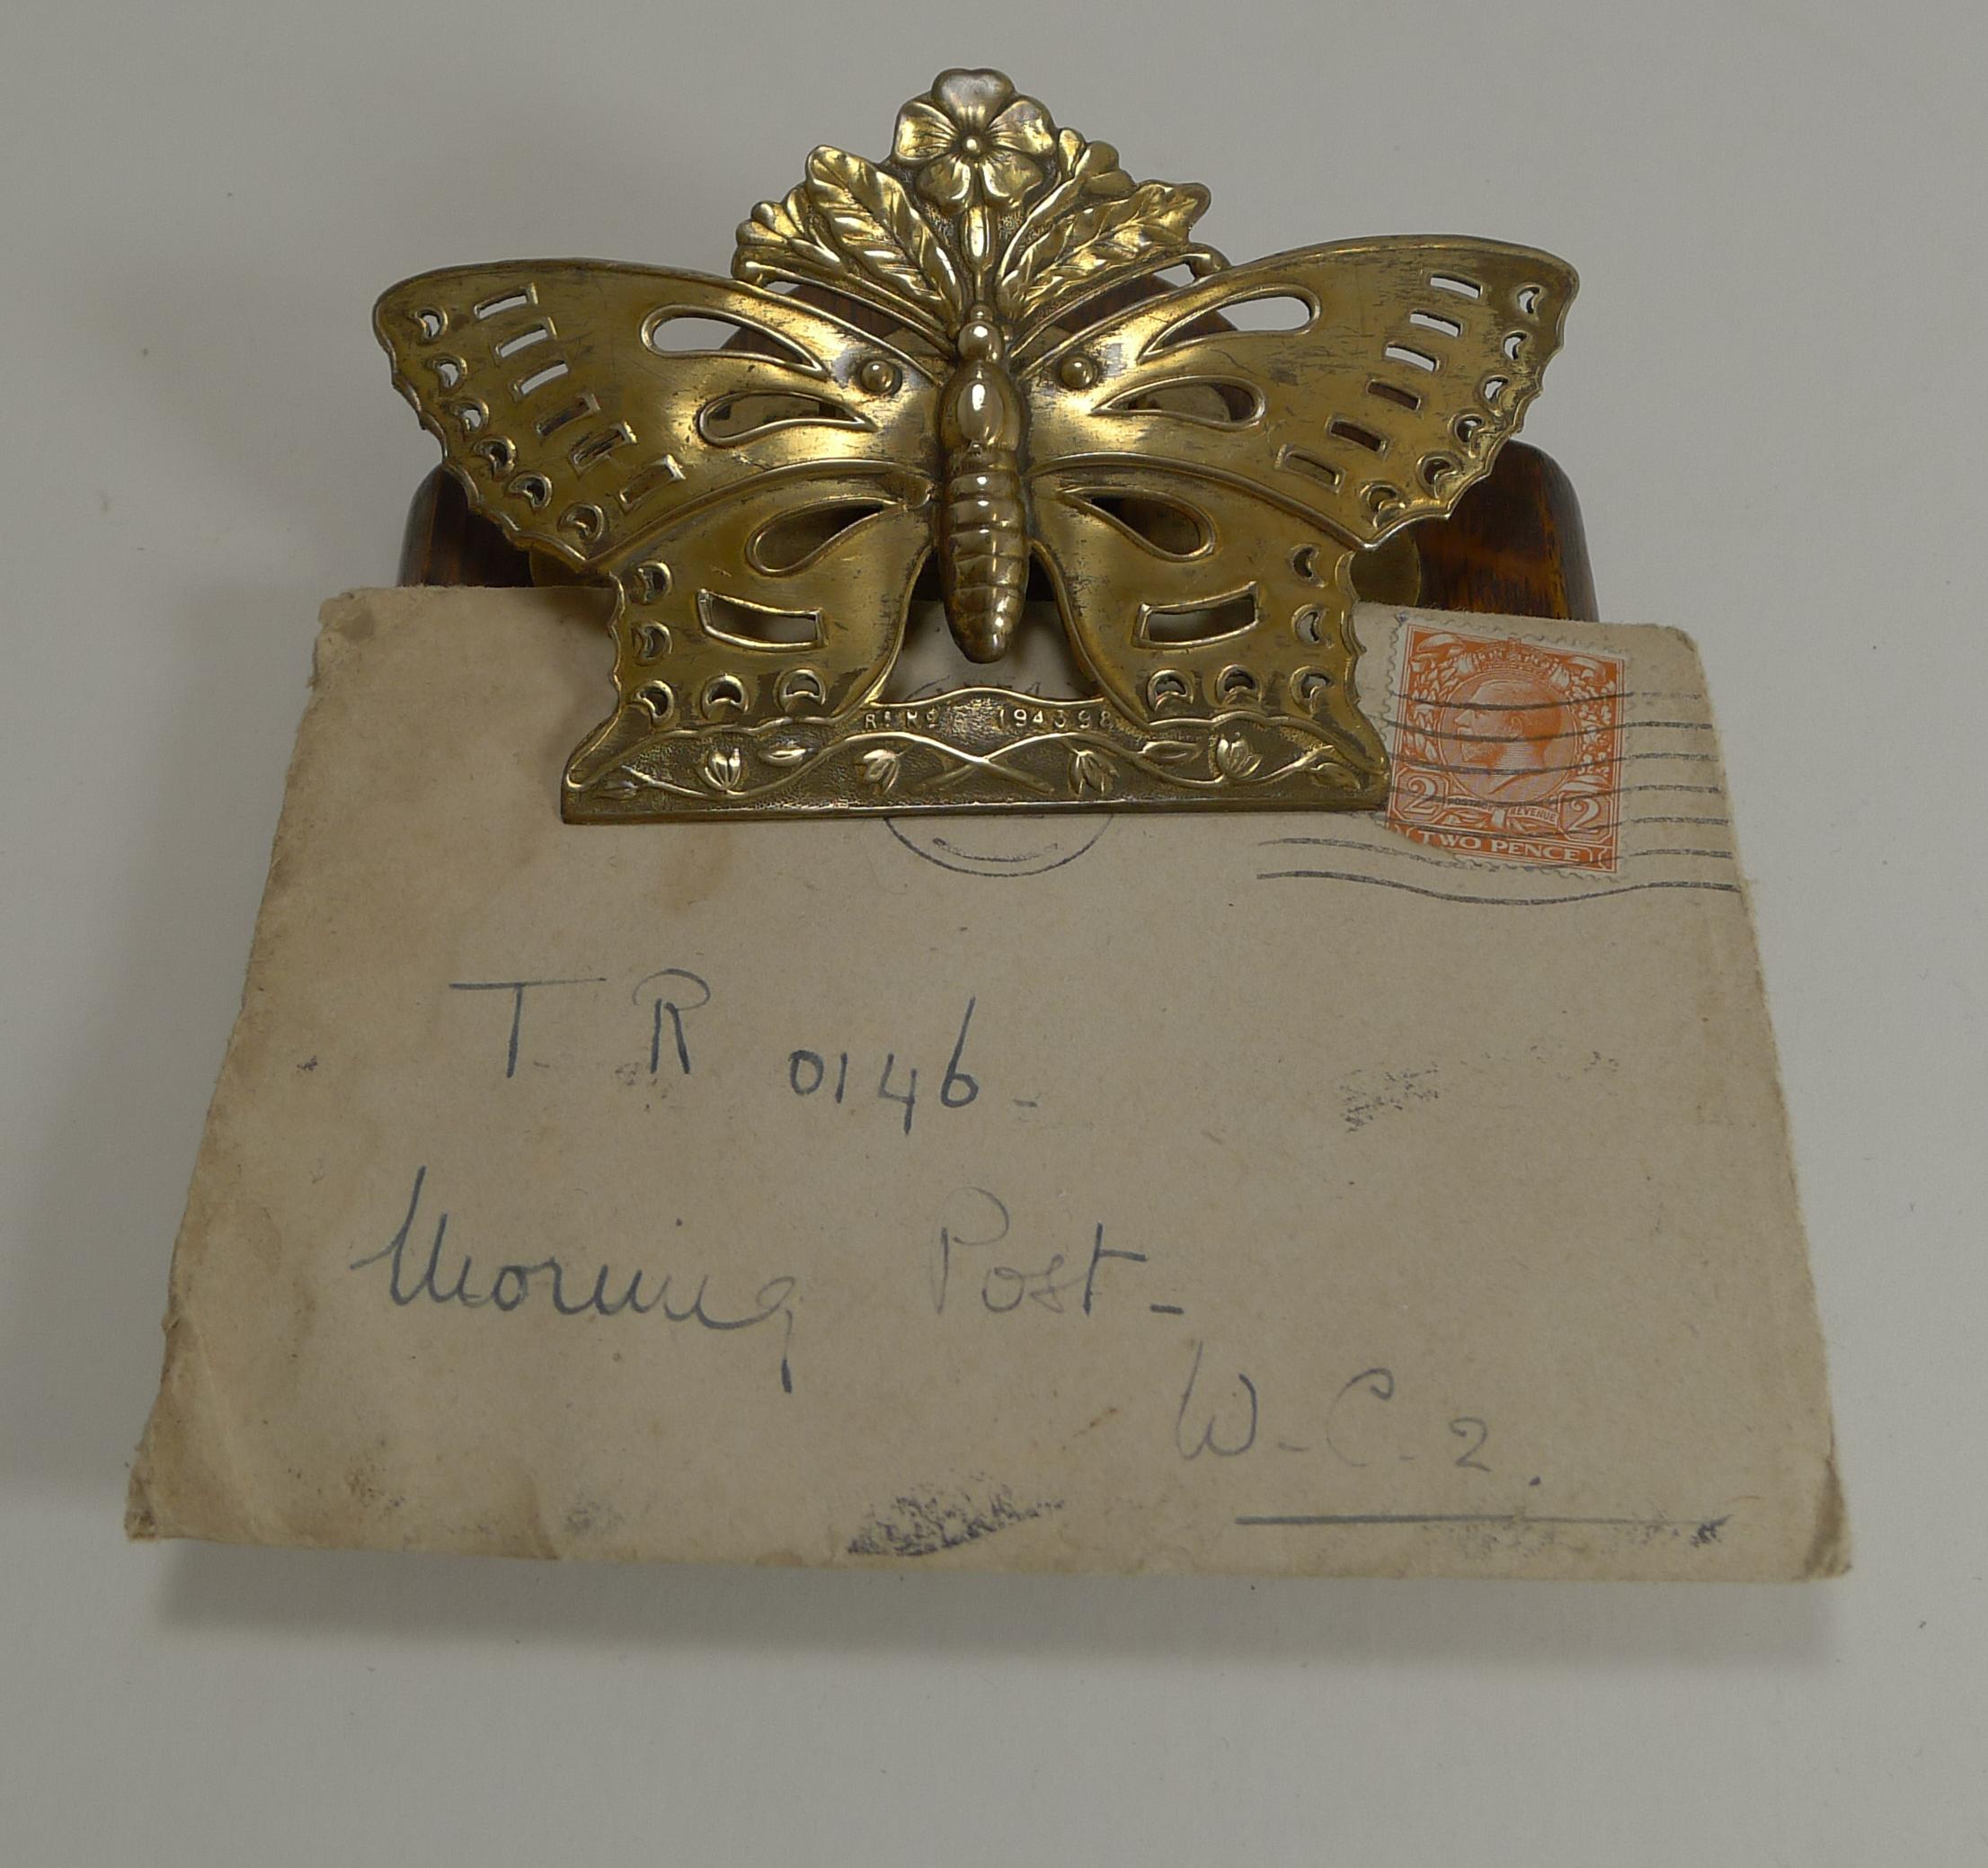 A wonderful Victorian desk-top letter clip with a solid Oak backing and the hinged clip made from brass in the form of a wonderful butterfly.

The hinge is strong and very usable and the perfect for business cards or keeping letters and papers in